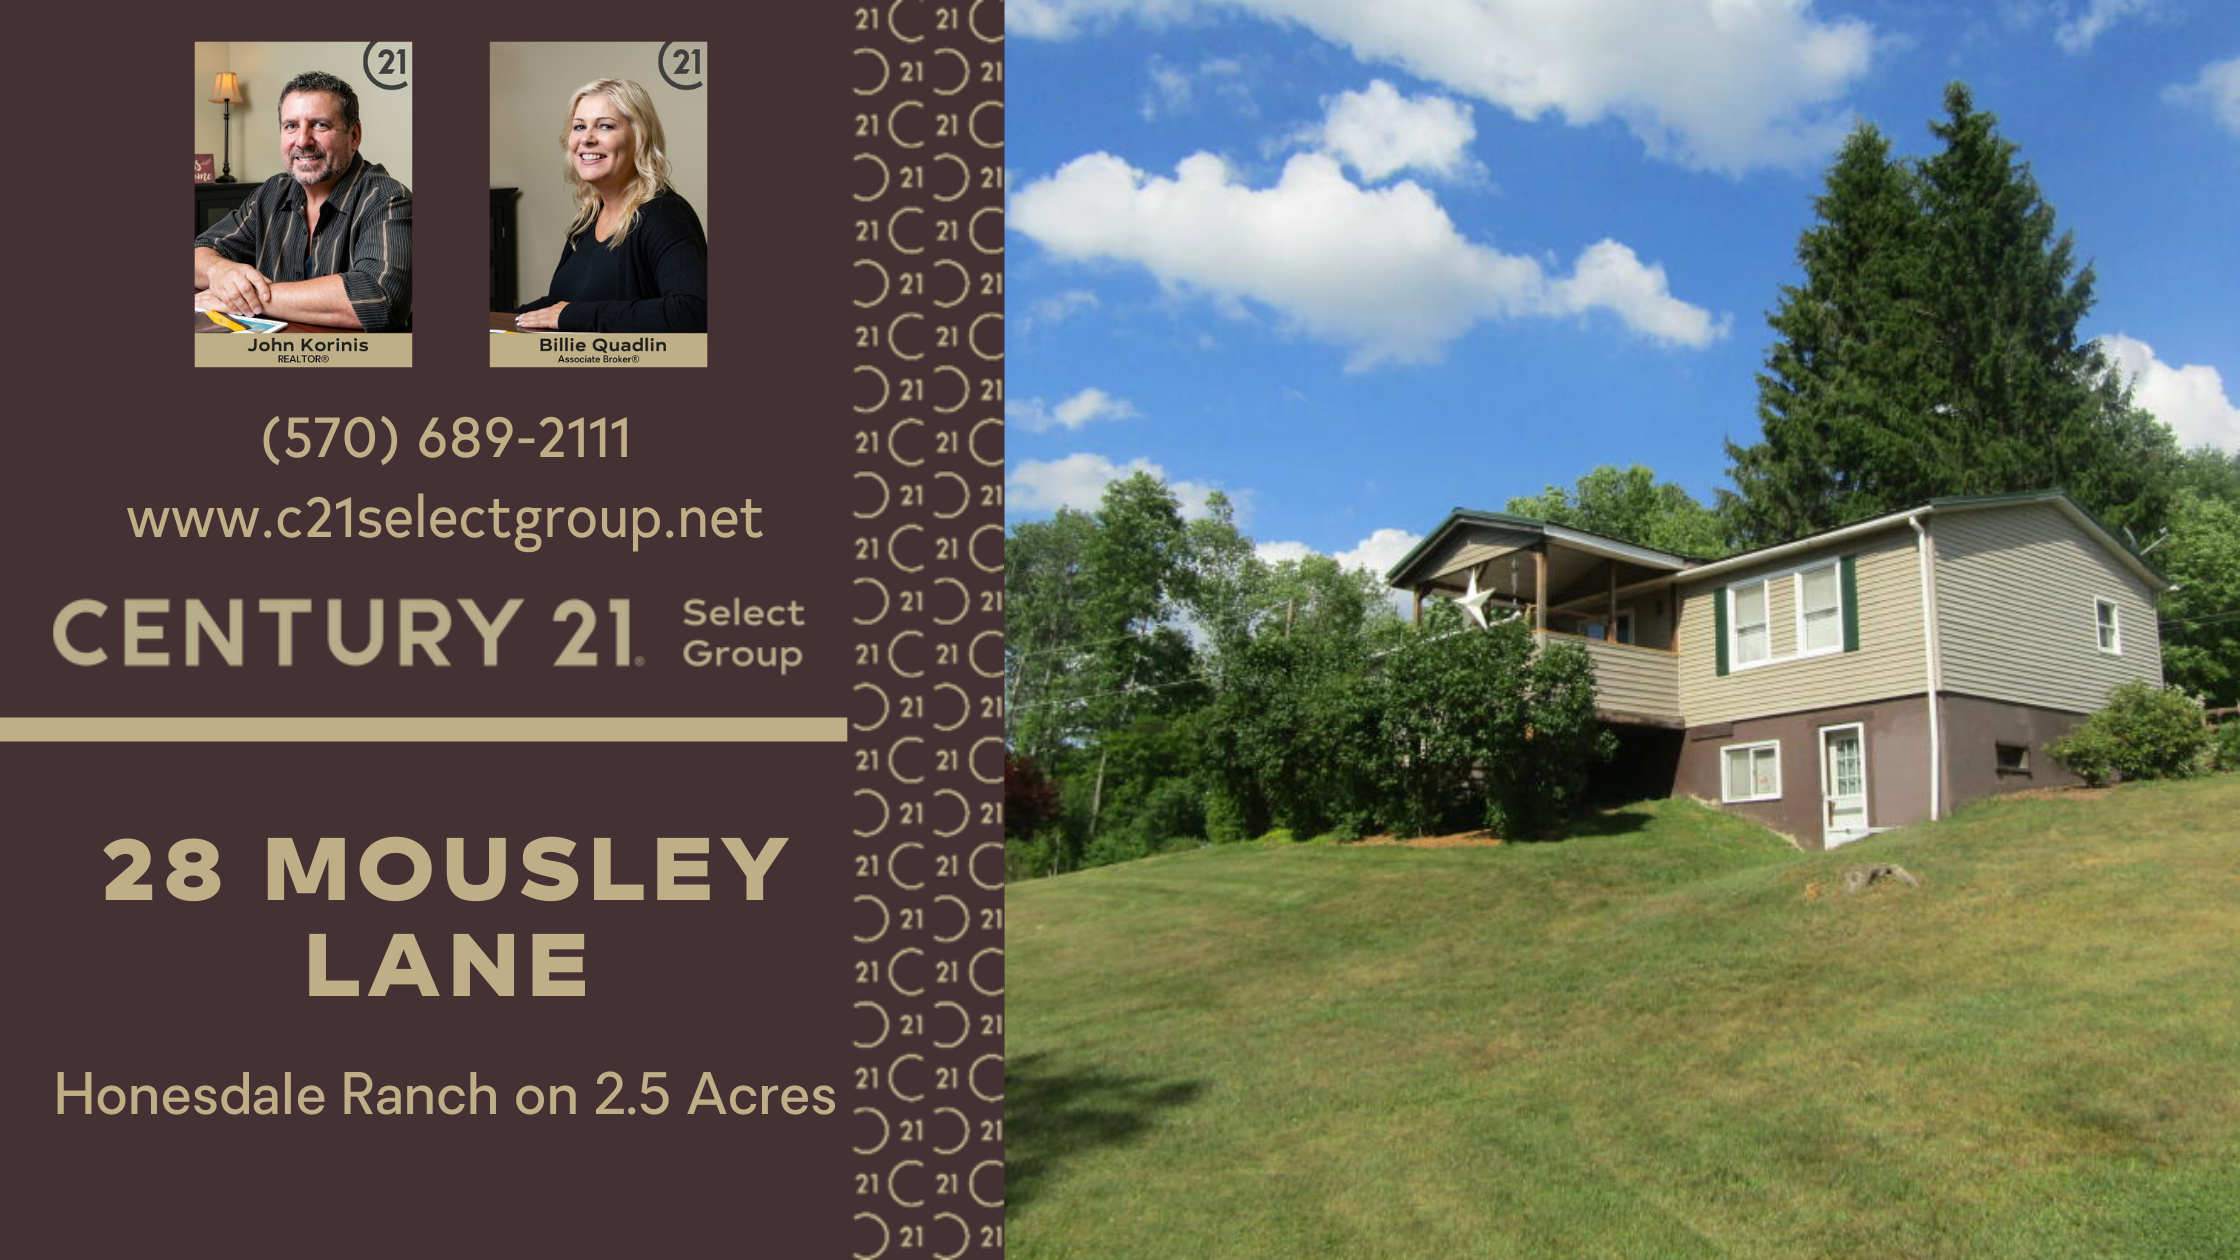 28 Mousley Lane: Honesdale Ranch on 2.5 Acres